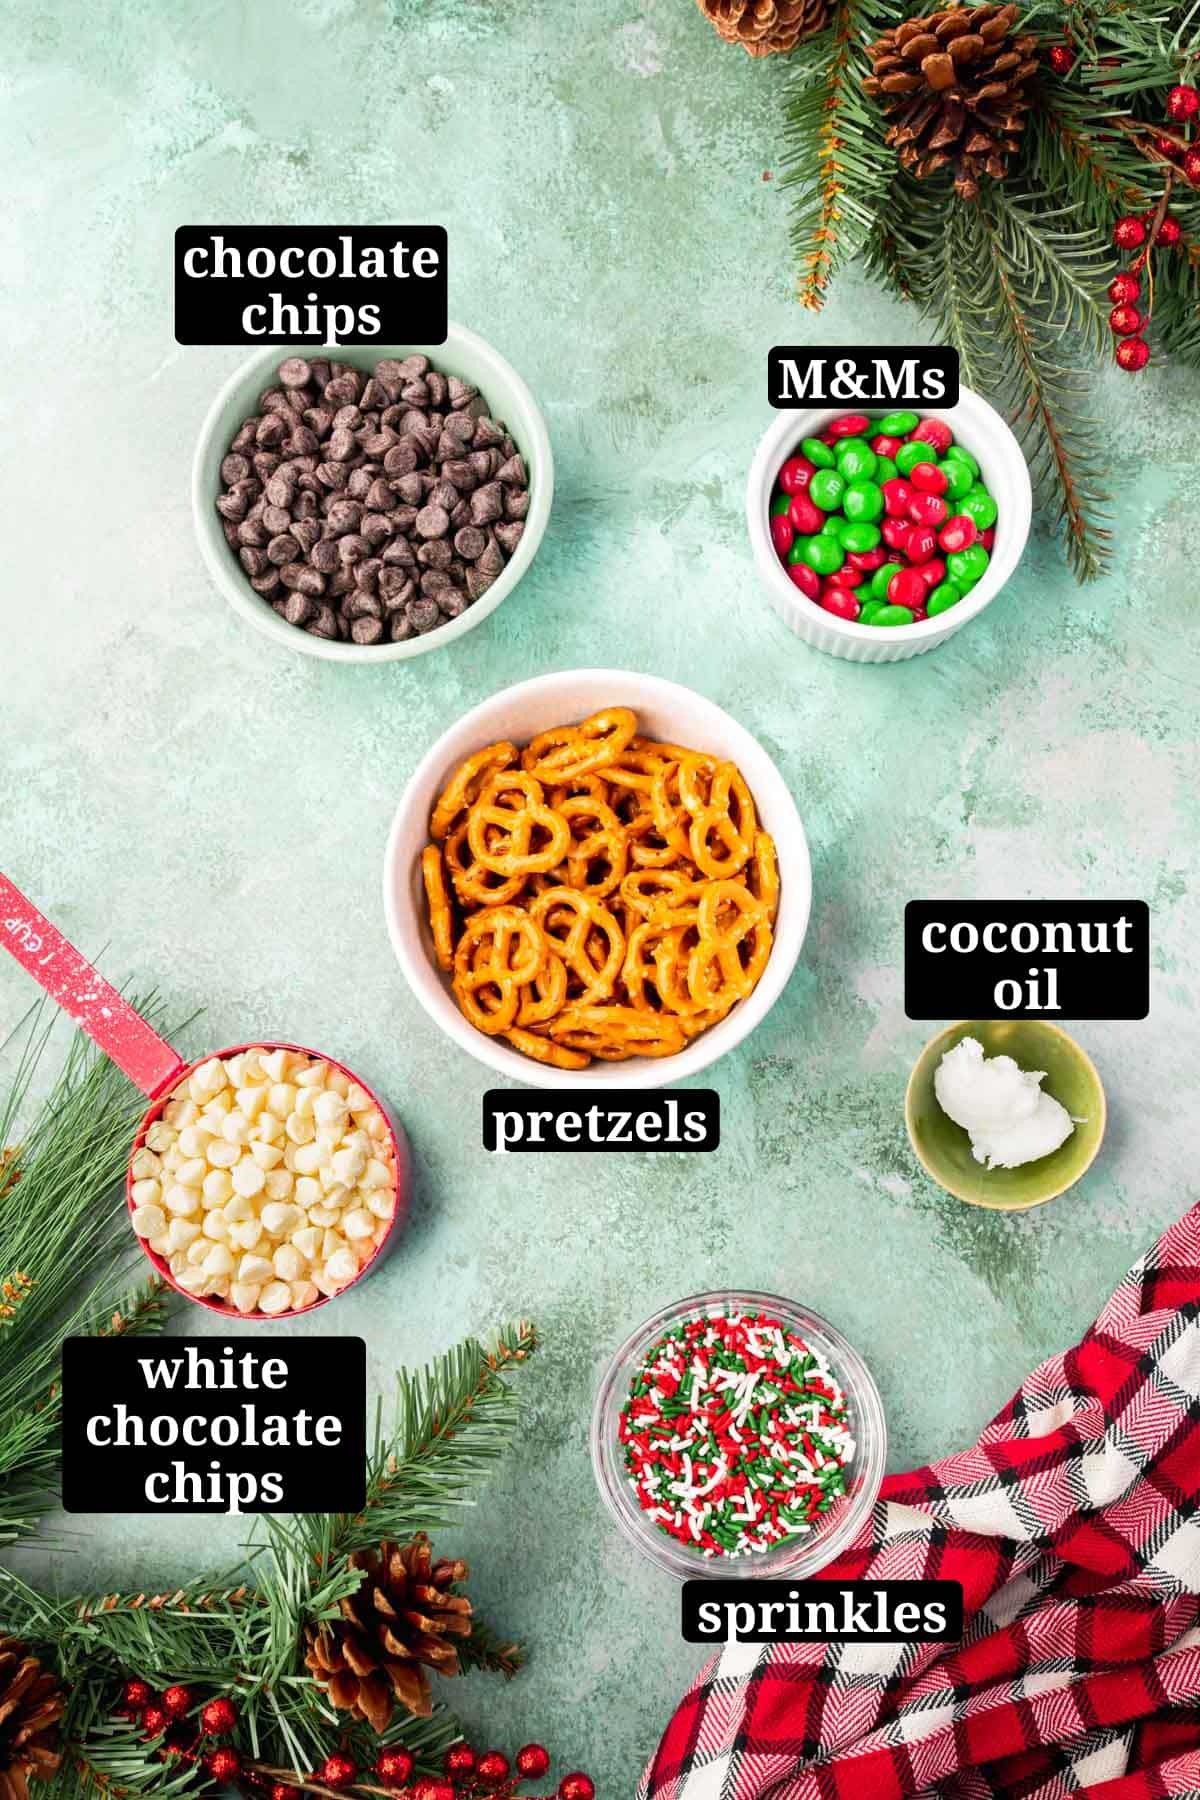 Small bowls of ingredients on a green table to make Christmas pretzels, including semi-sweet chocolate chips, red and green M&Ms, white chocolate chips, pretzels, coconut oil, and Christmas sprinkles with text overlays over each ingredient.